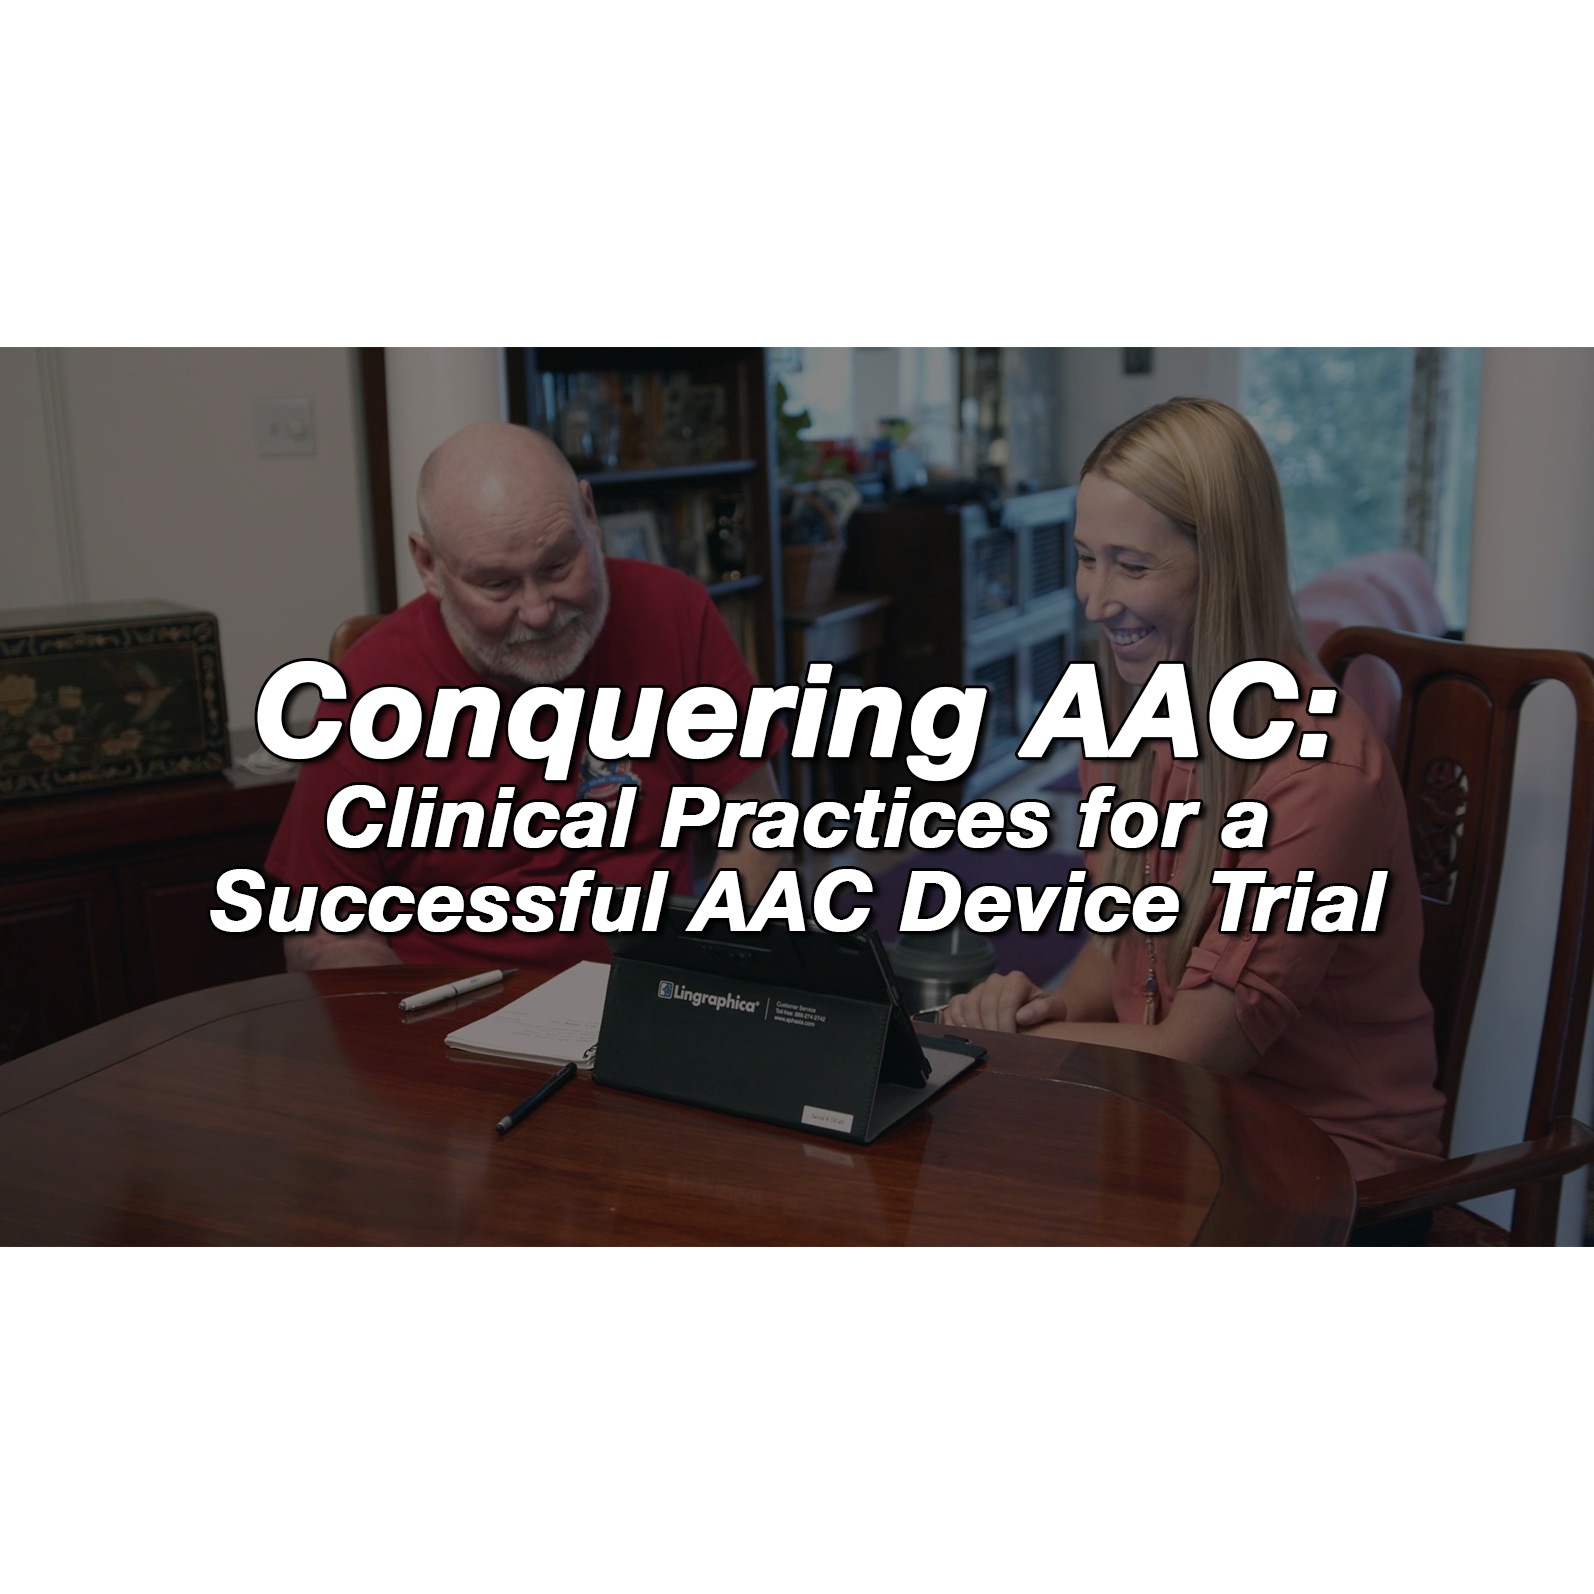 Conquering AAC: Clinical Practices for a Successful AAC Device Trial (Course 2)